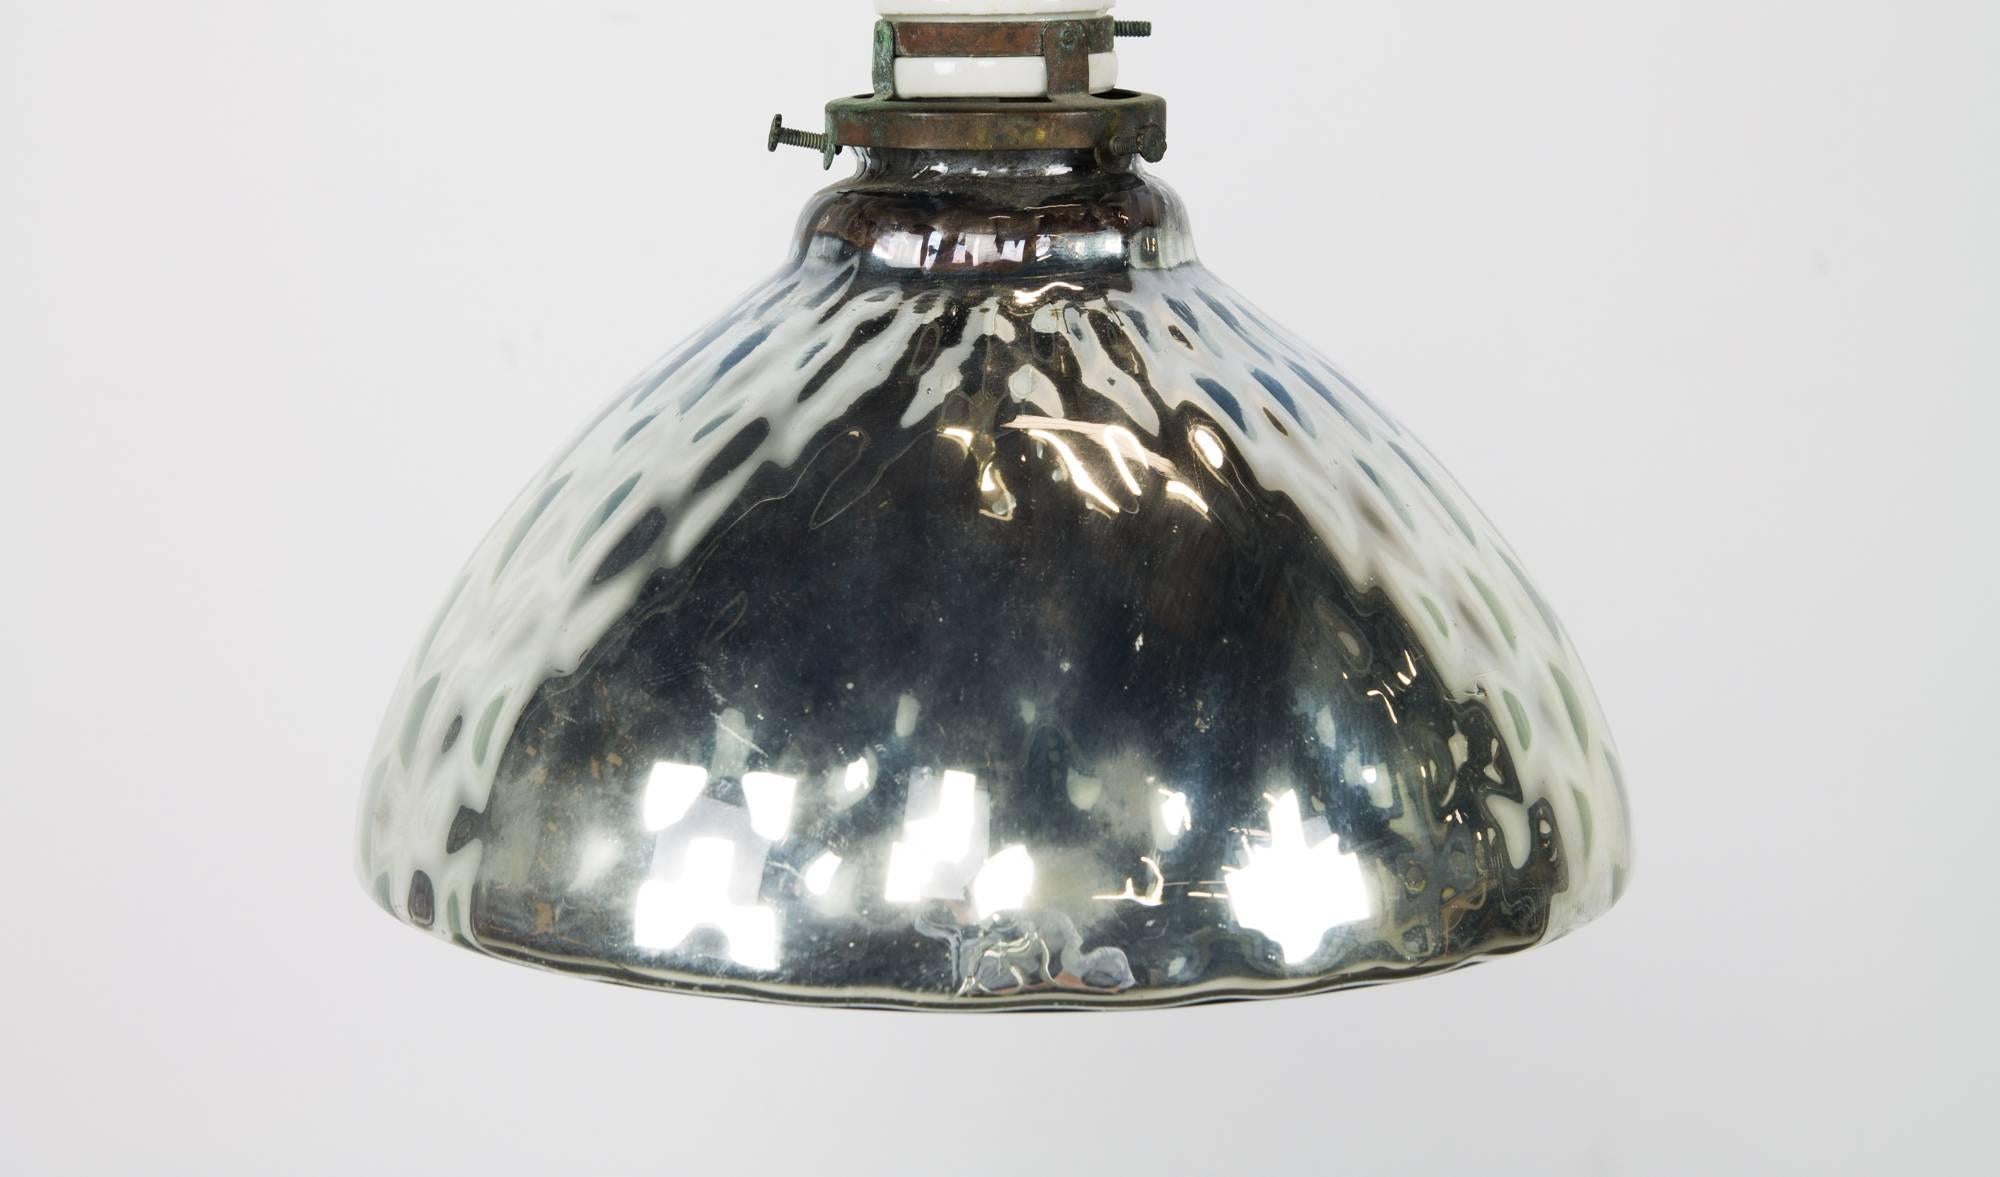 A stunning Industrial 'X-Ray' pendant with original brass hardware, porcelain fixture, and mirrored mercury glass shade featuring double-walled silvered glass for high reflectivity, and a quilting pattern for increased diffusion.